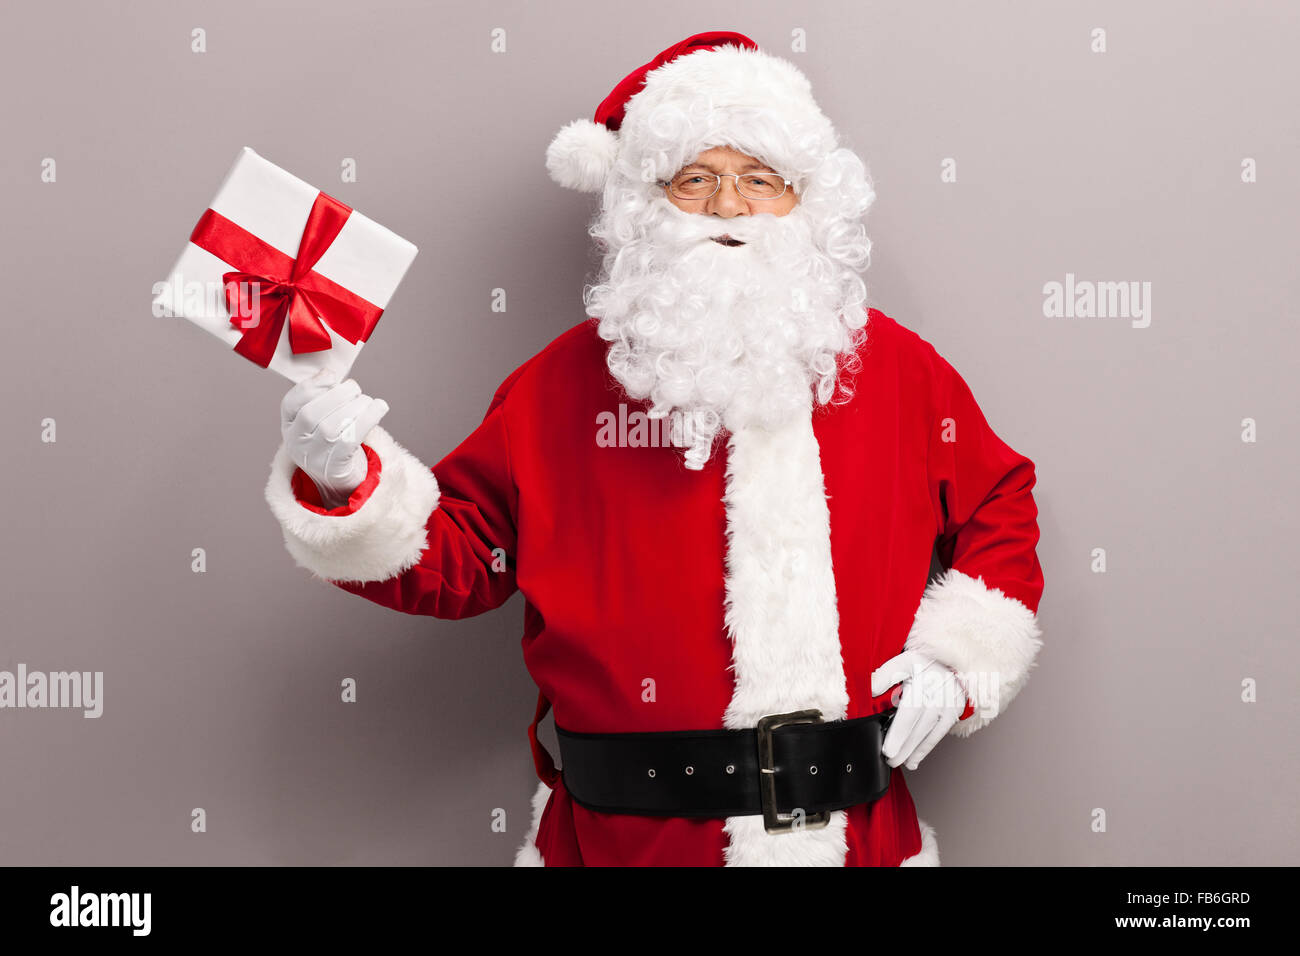 Mature man in Santa Claus costume holding a present wrapped in a white paper with a red ribbon Stock Photo